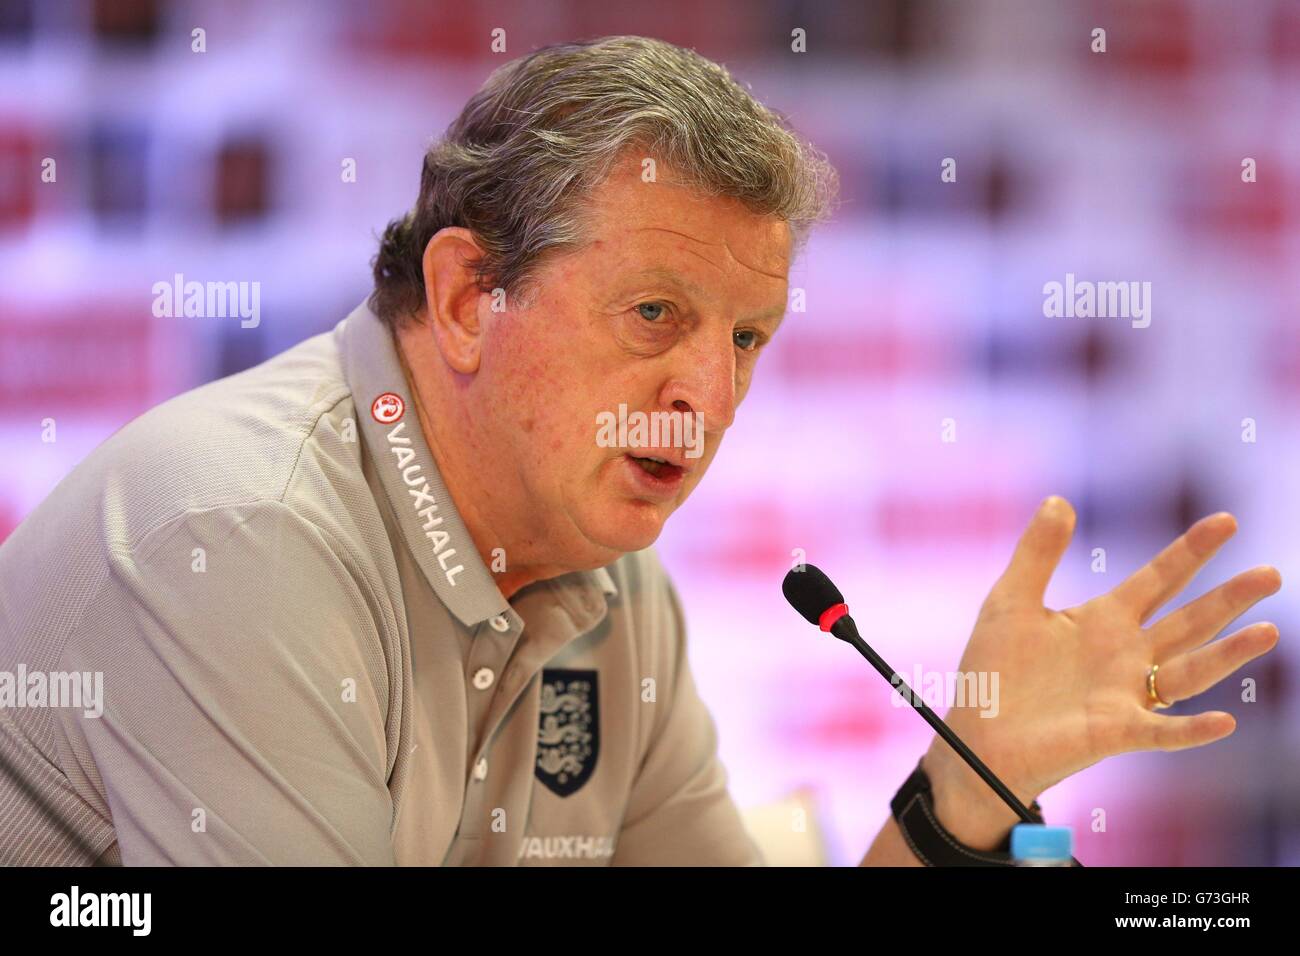 Soccer - FIFA World Cup 2014 - Group D - England v Italy - England Training Session and Press Conference - Day Two - Urca Mil... Stock Photo